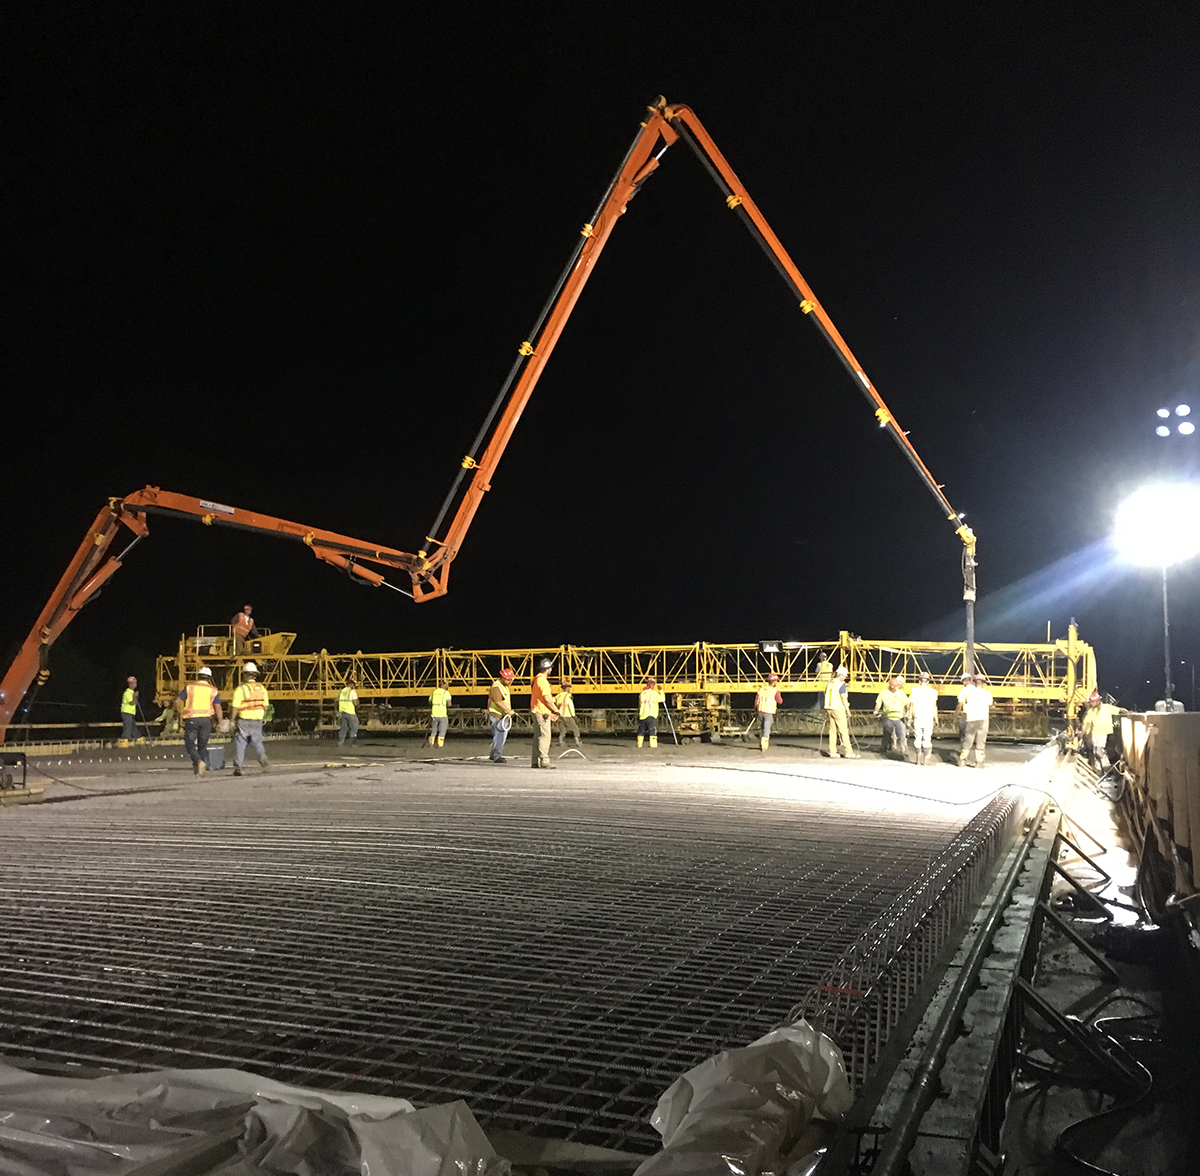 A construction crew works at night, while a large crane-type device looms over them, pouring concrete.